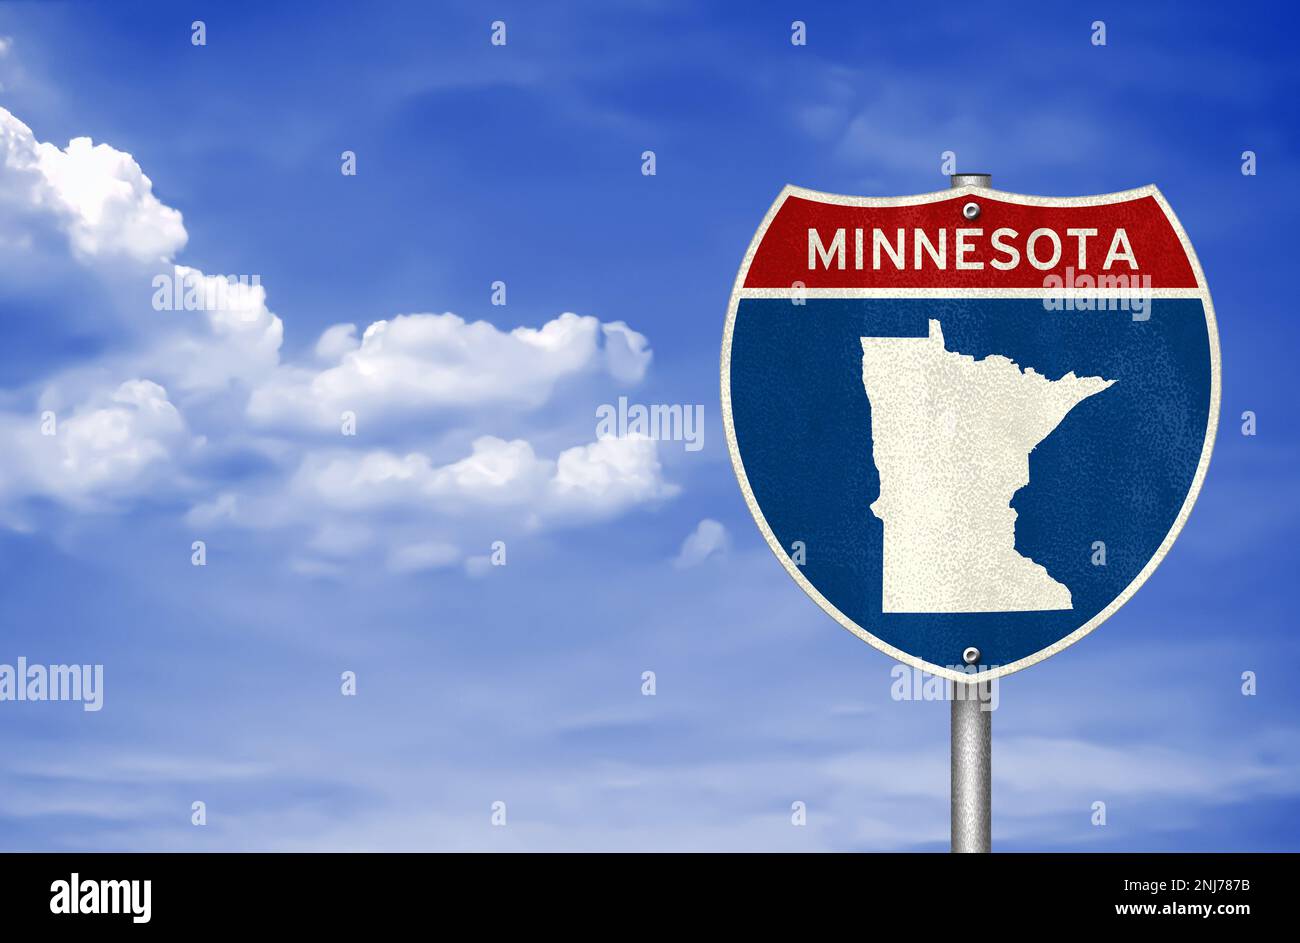 Minnesota state map - road sign Stock Photo